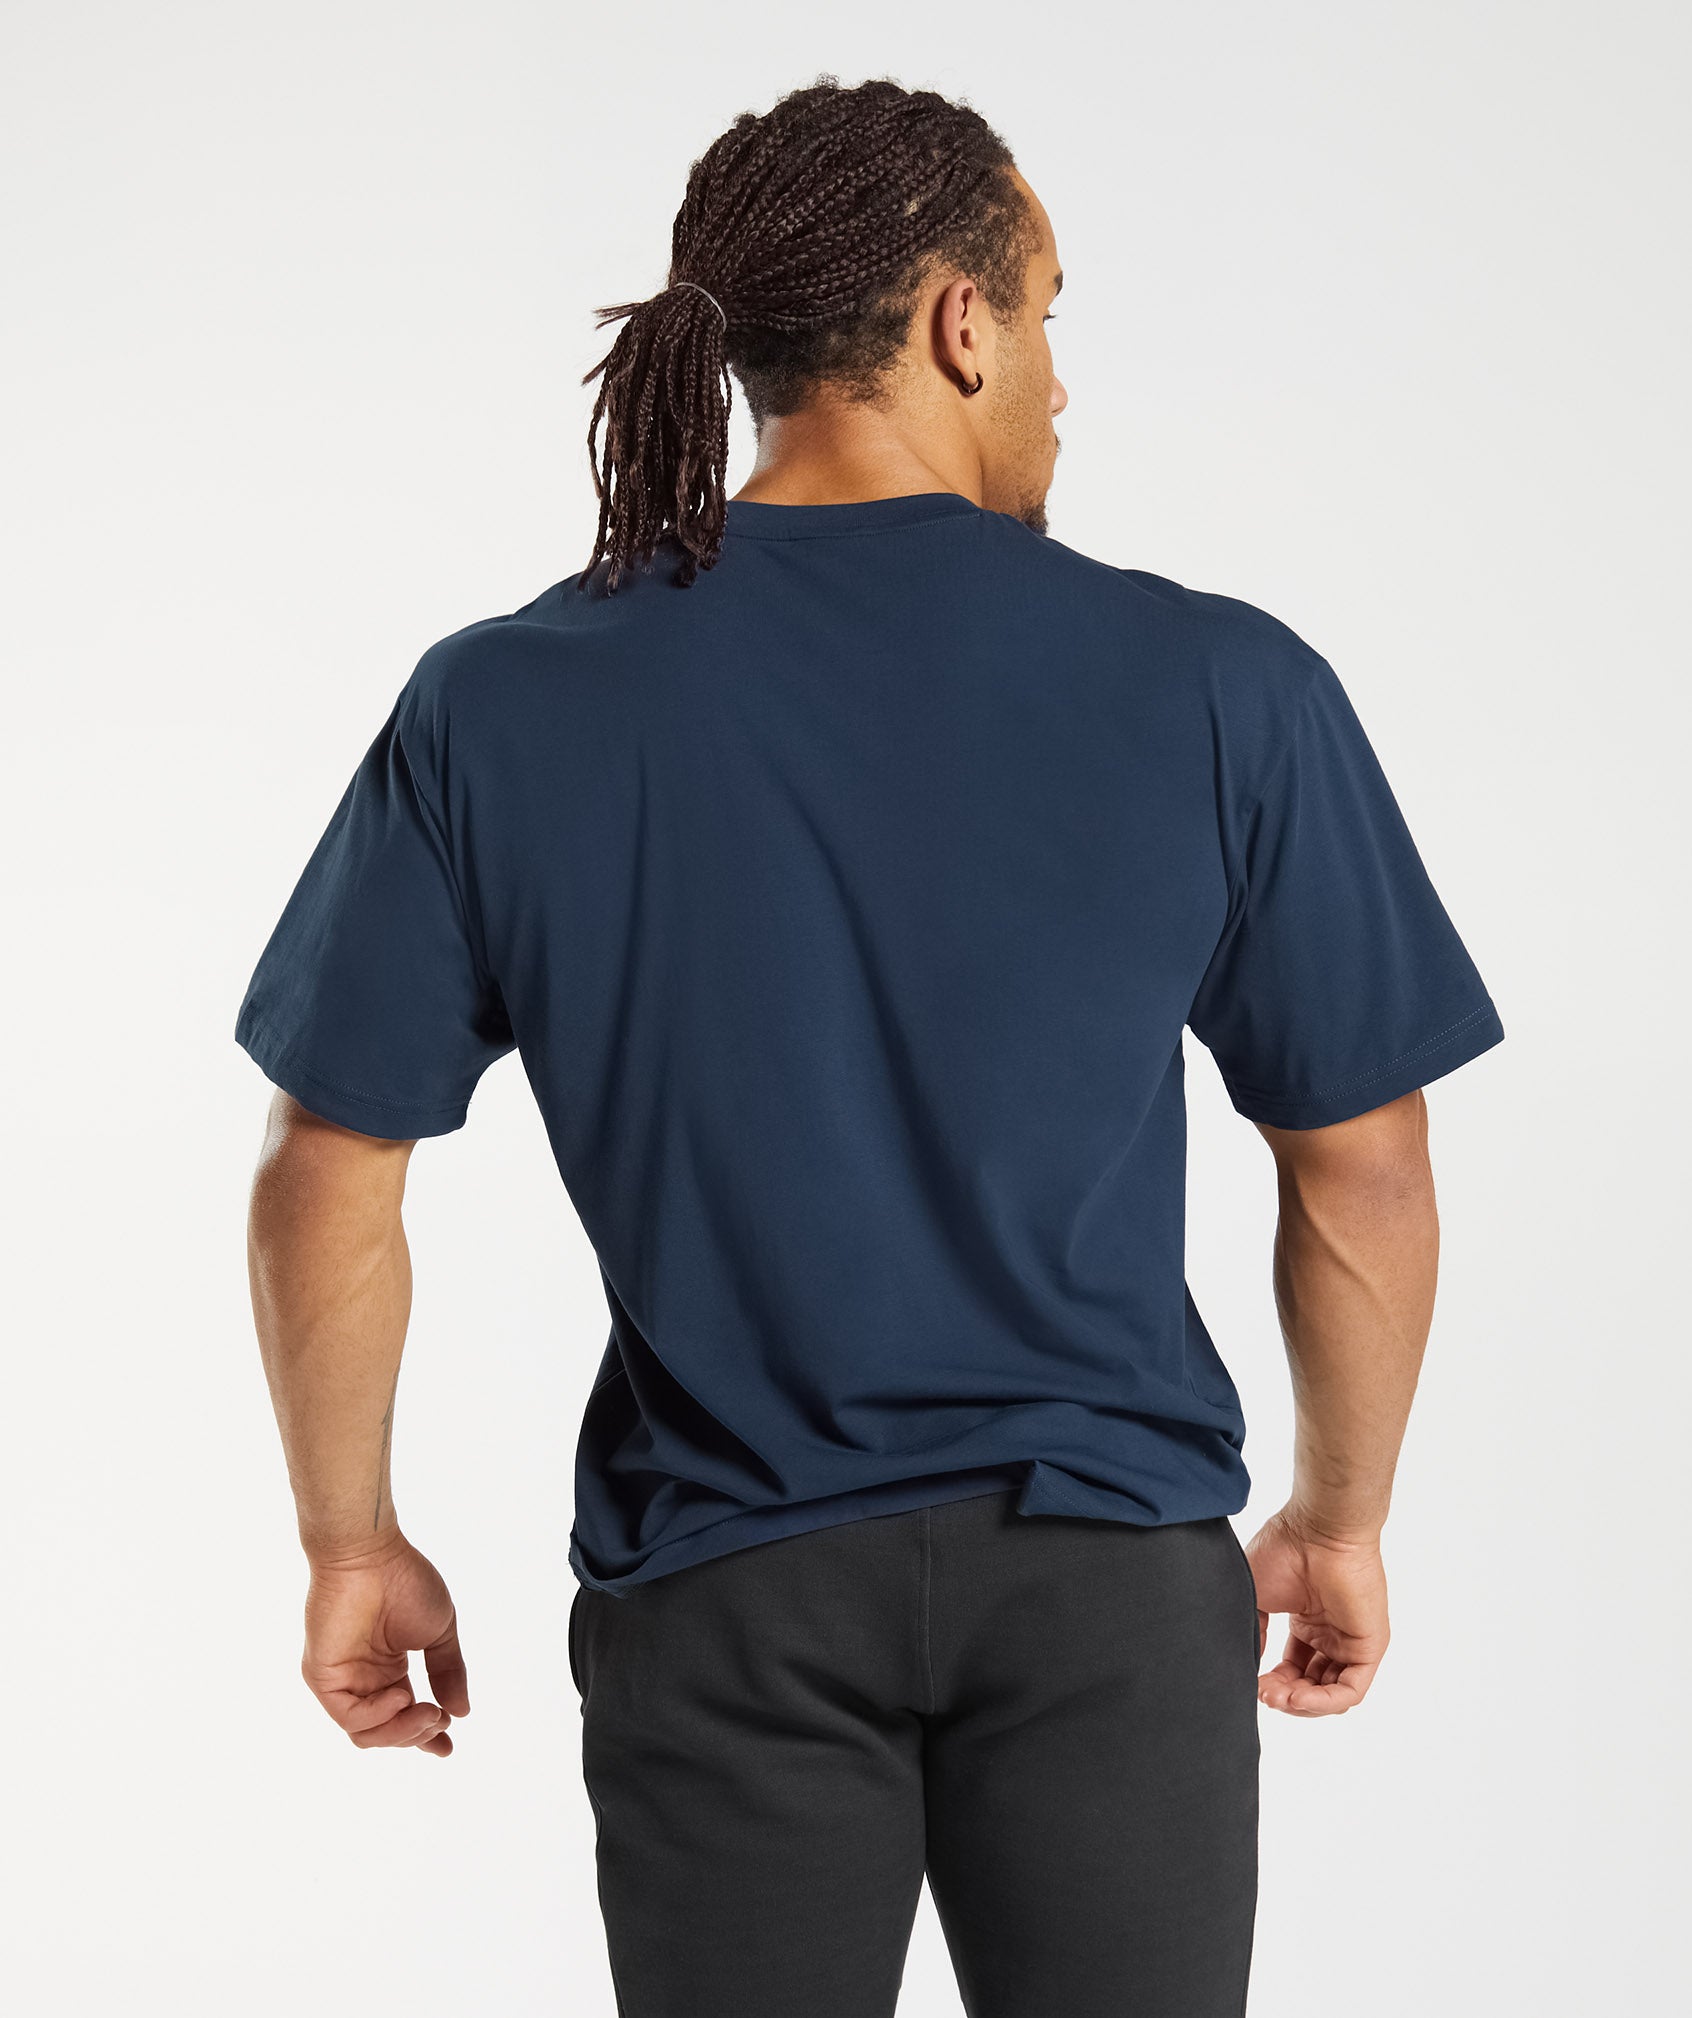 Apollo Oversized T-Shirt in Navy - view 2